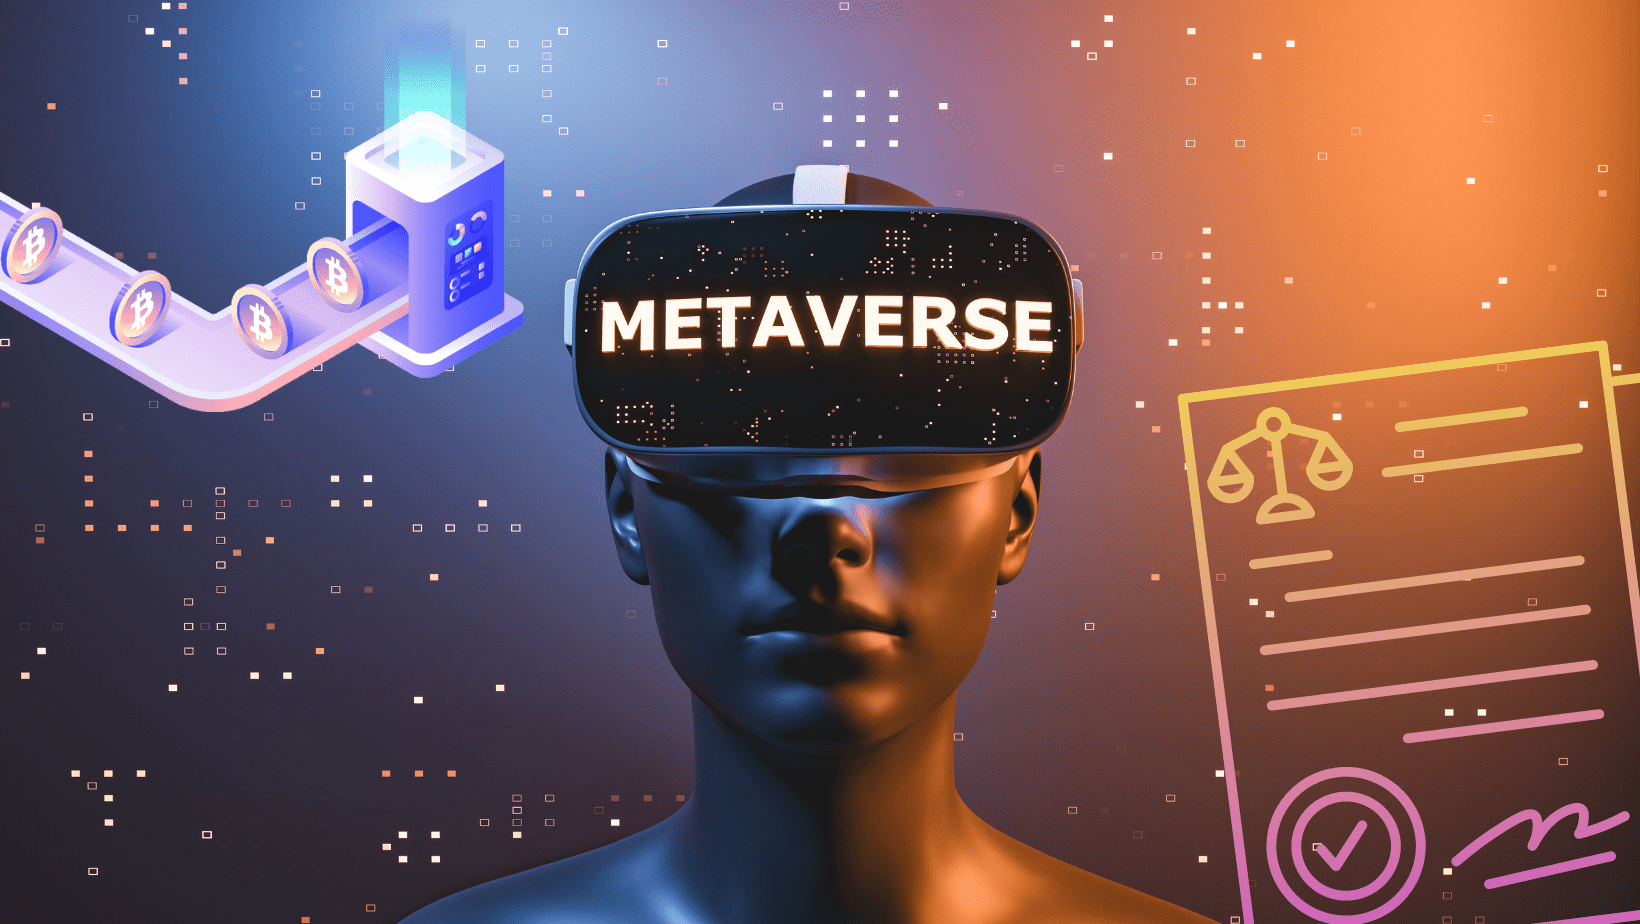 Facebook is racing the game industry to the metaverse - Protocol